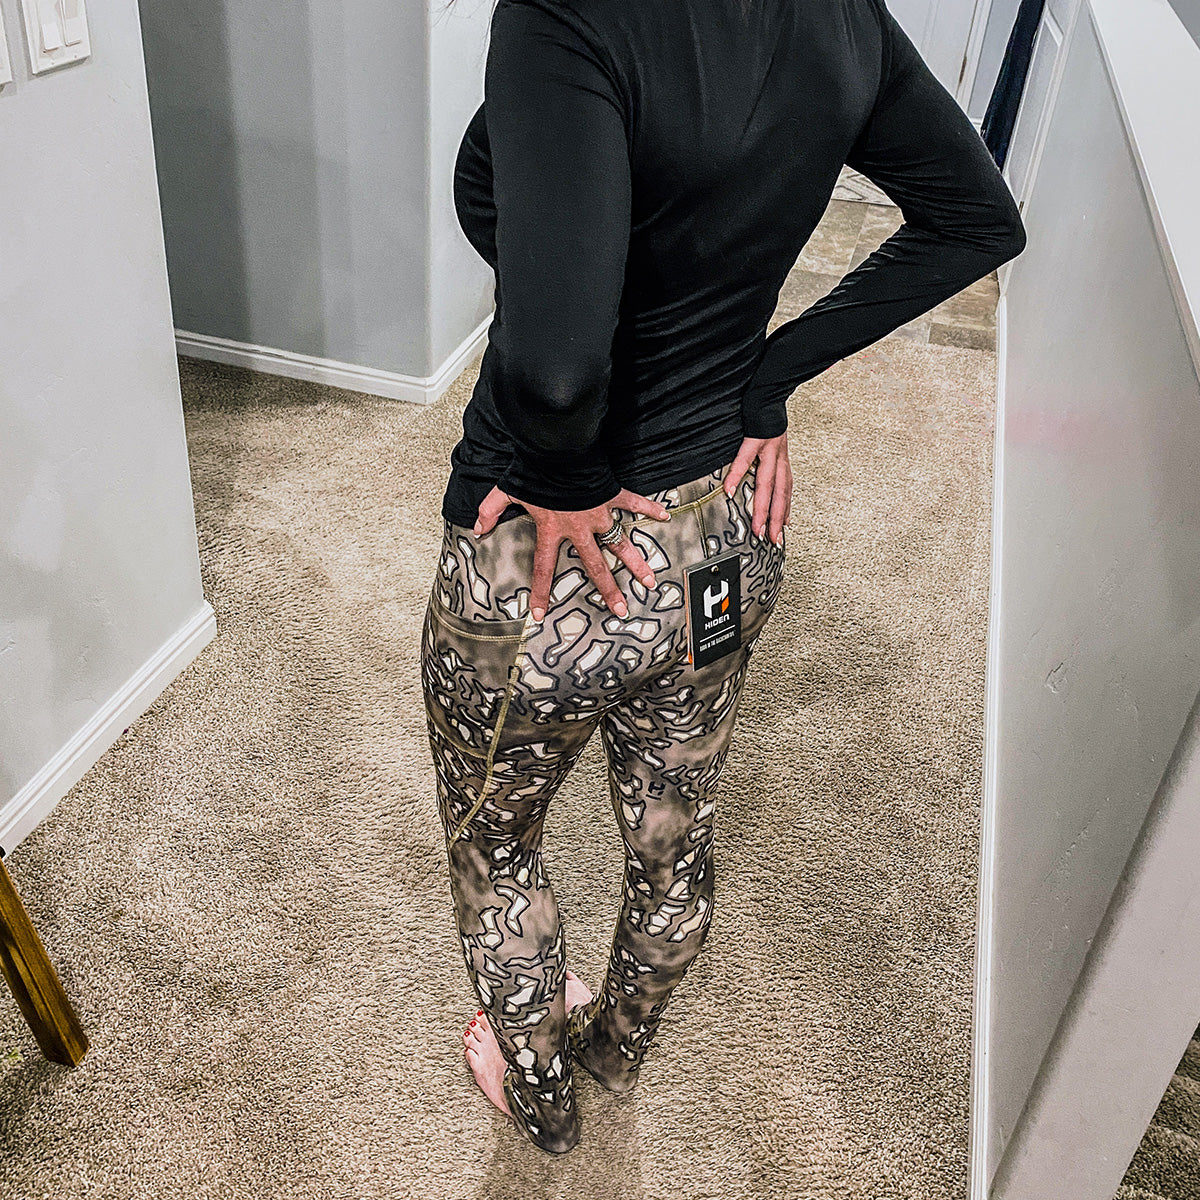 Vakandi Apparel | Concealed Carry Leggings & Tactical Wear